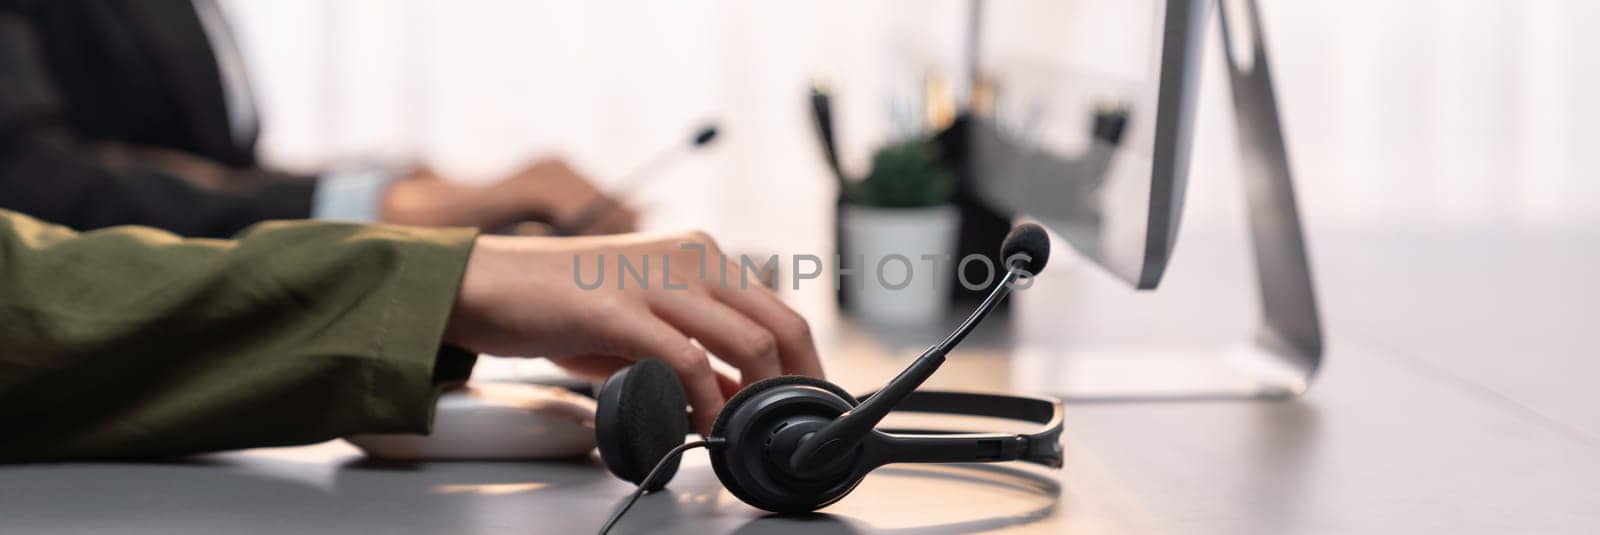 Panorama focus headset on call center workspace desk with blur operator. Prodigy by biancoblue